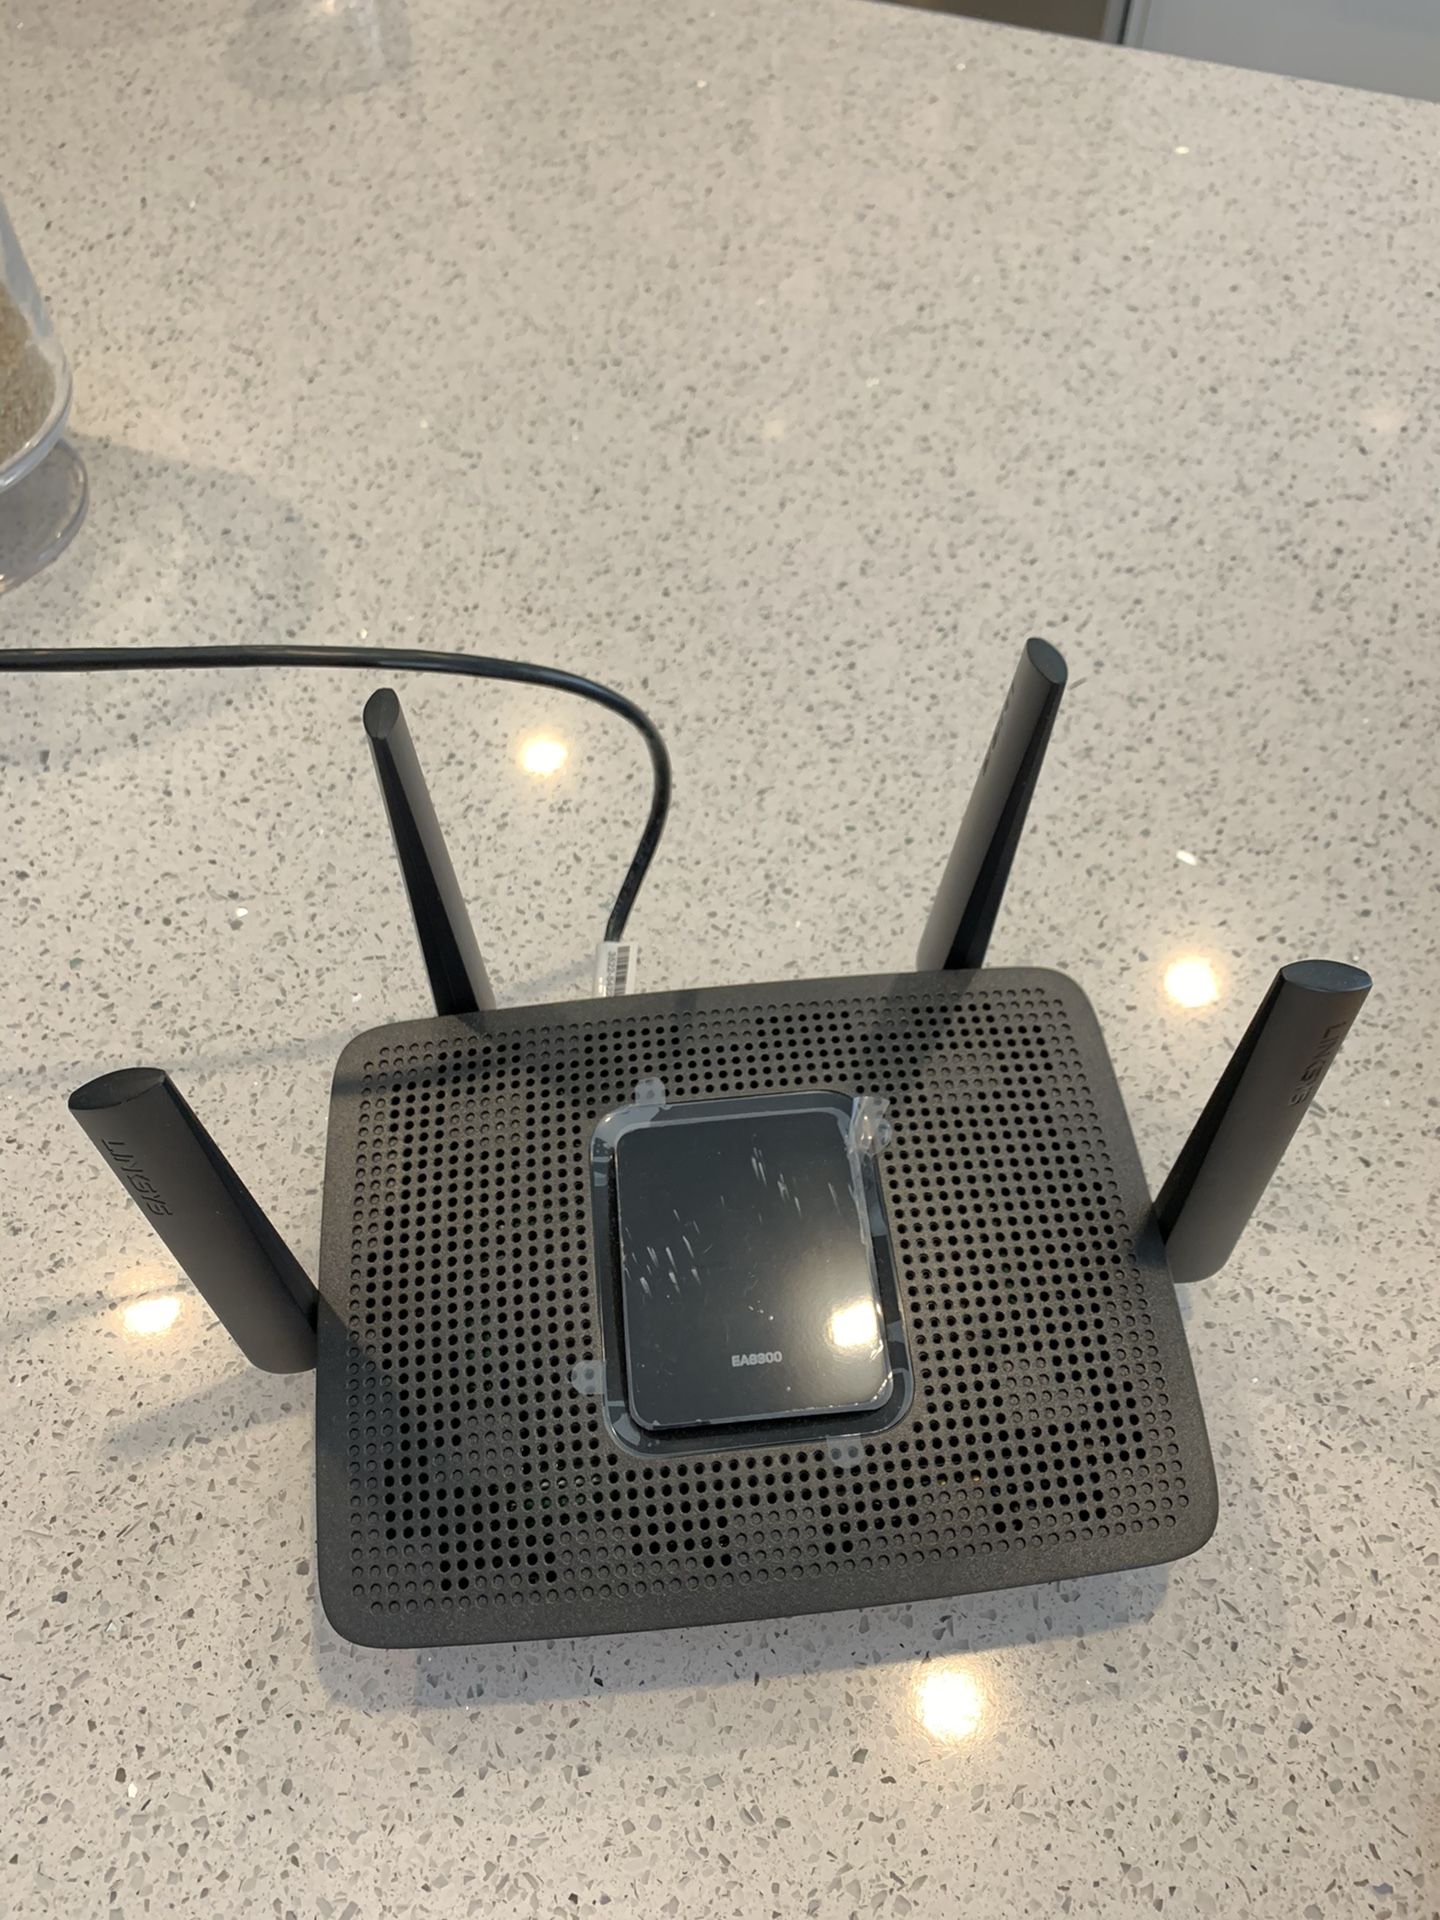 Linksys EA8300 Tri-Band WIFI Router